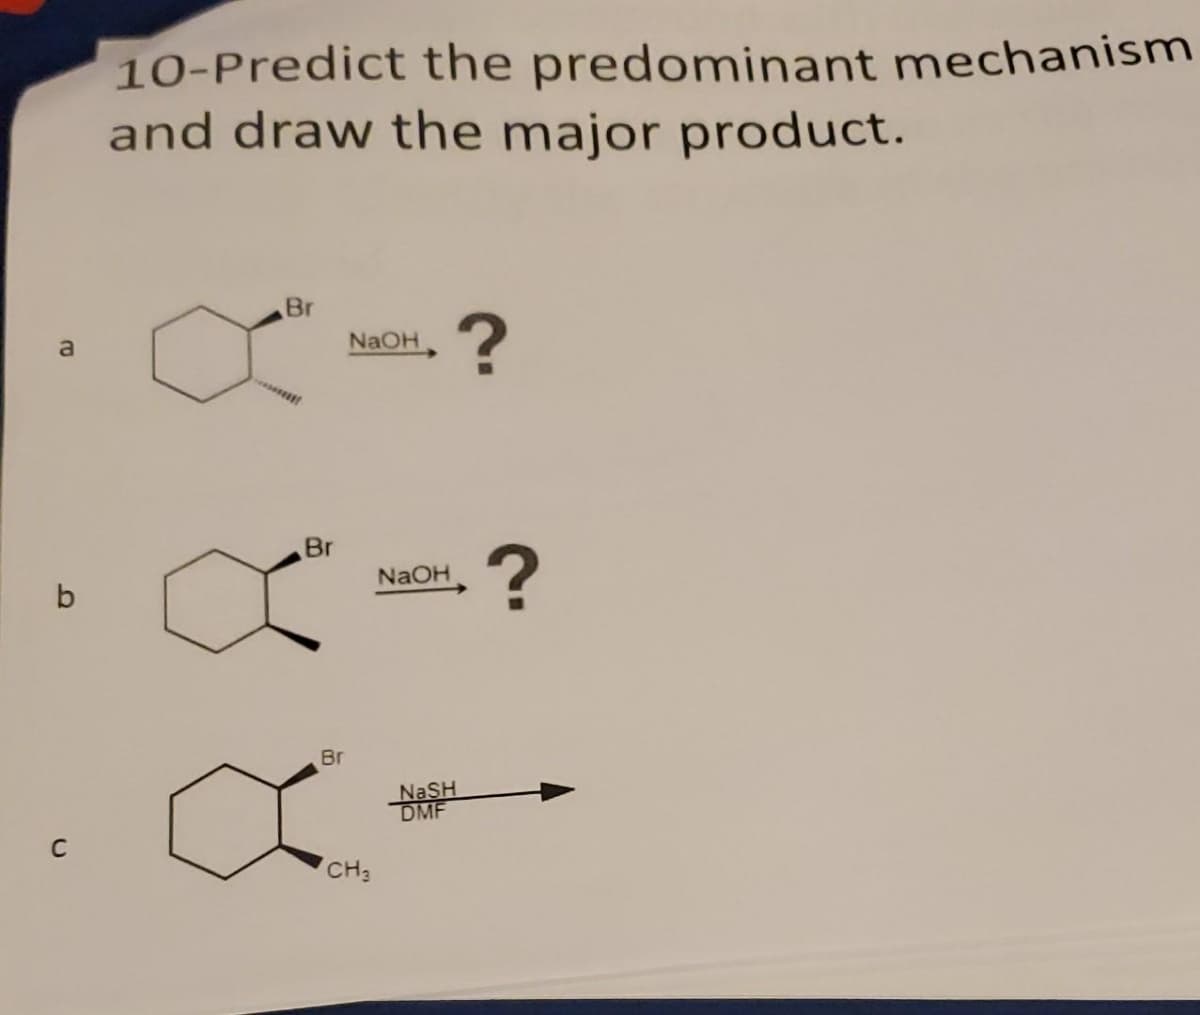 10-Predict the predominant mechanism
and draw the major product.
Br
.?
a
NAOH
Br
NAOH
b
Br
NASH
DMF
C
CH3
